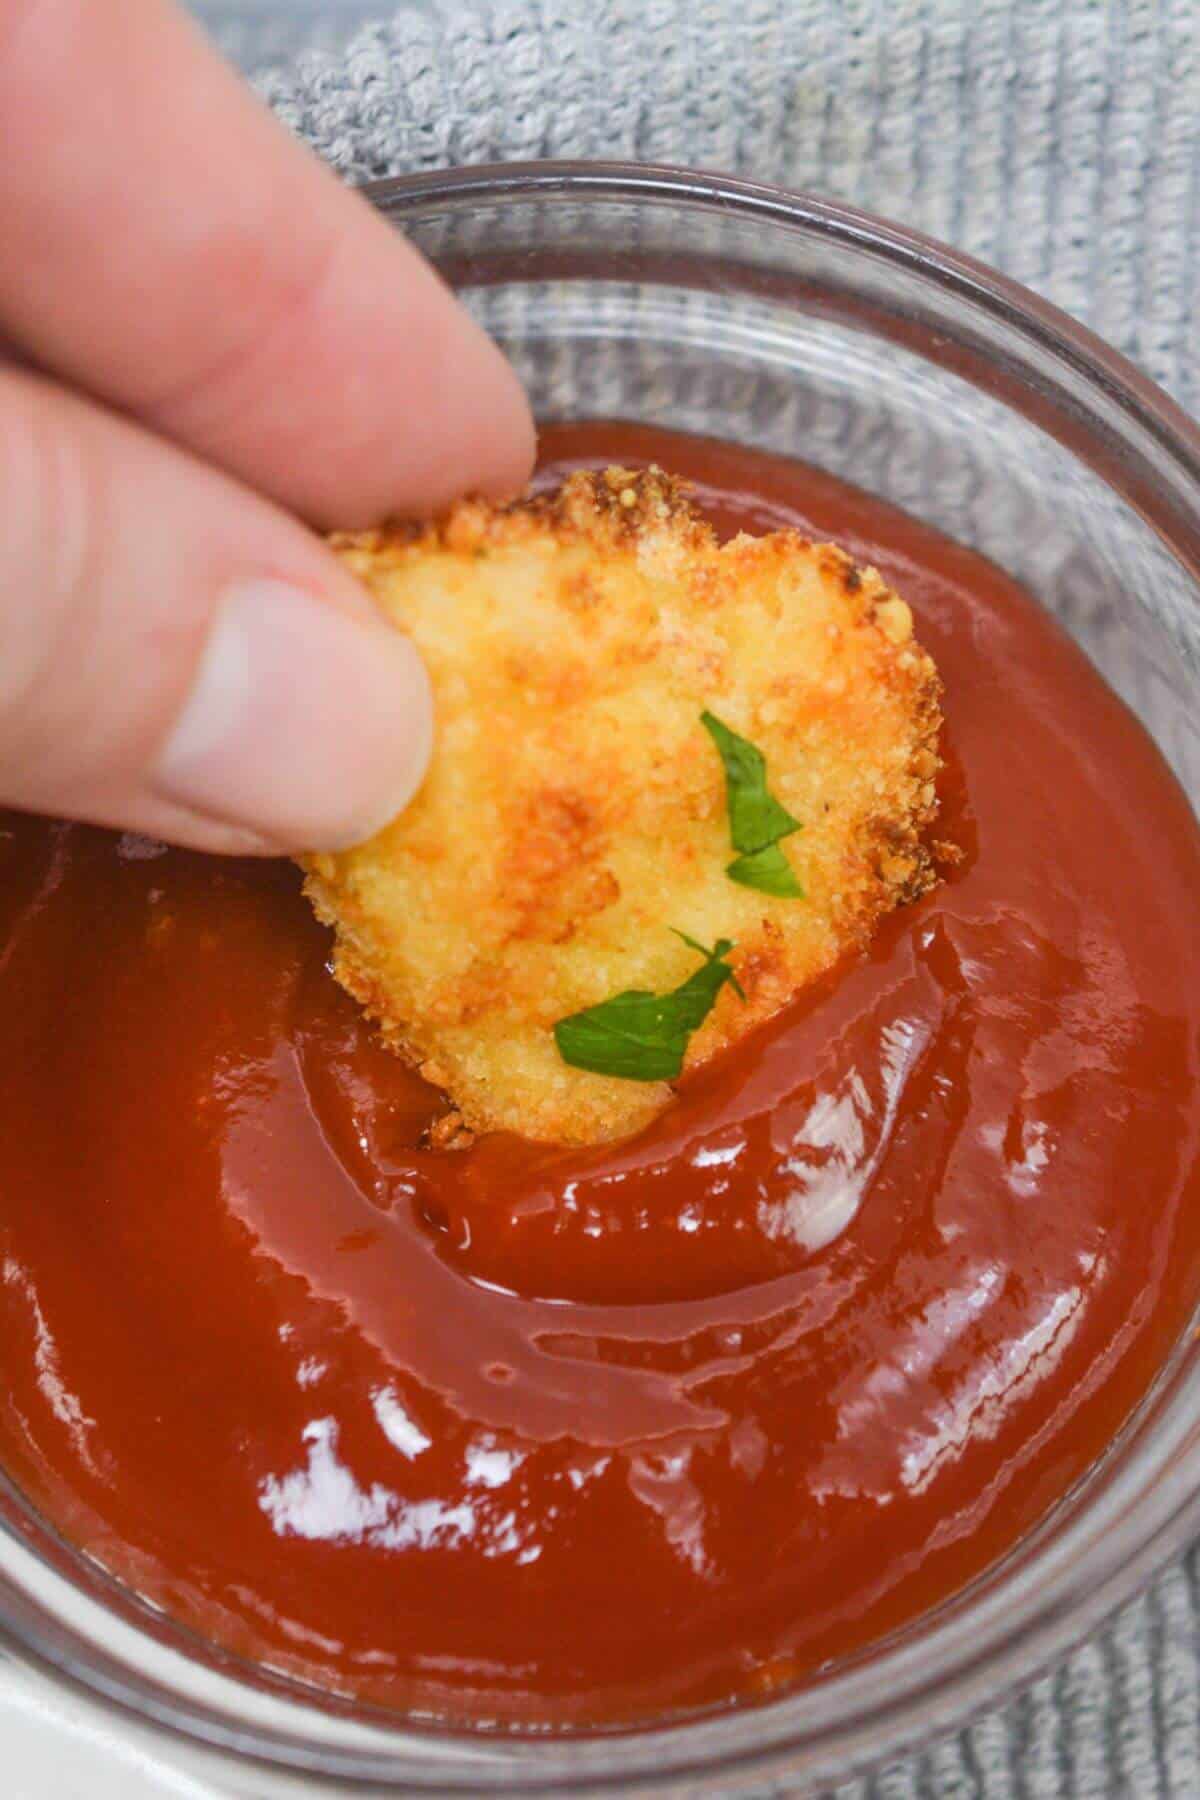 Dipping chicken nugget into barbecue sauce.